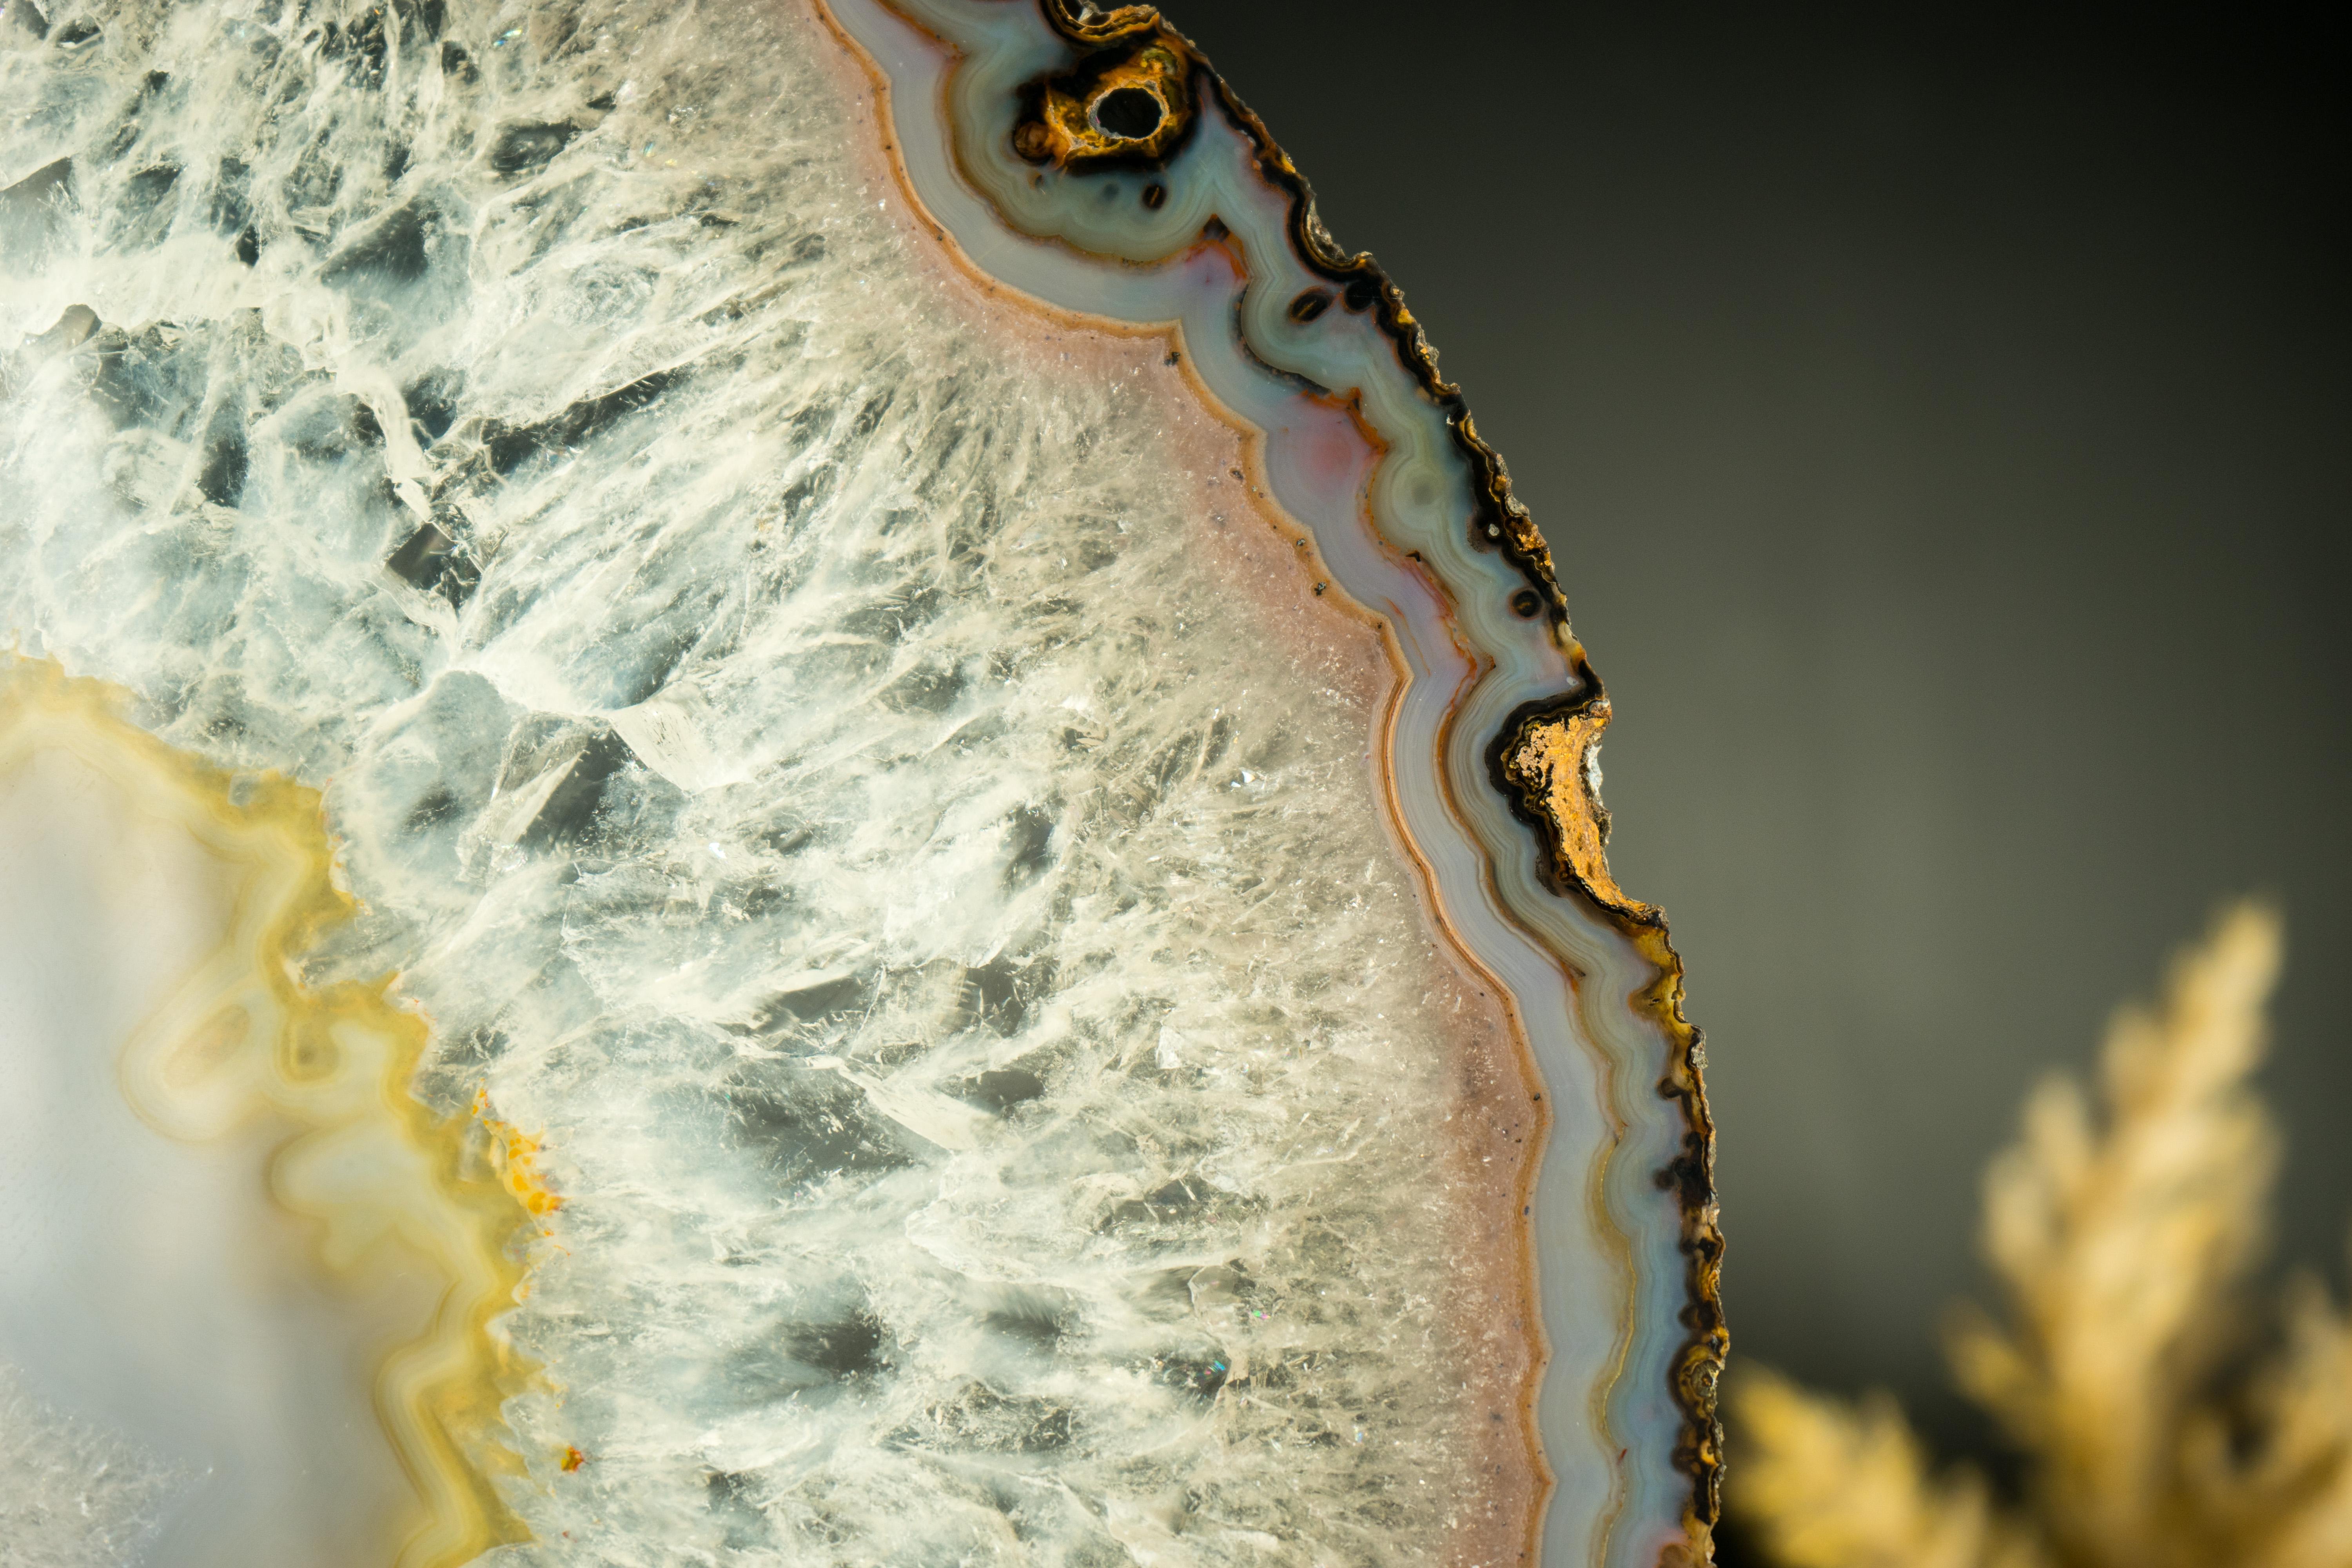 Gallery Grade Large Lace Agate Slice, with Ice-Like Crystal and Colorful Agate 8